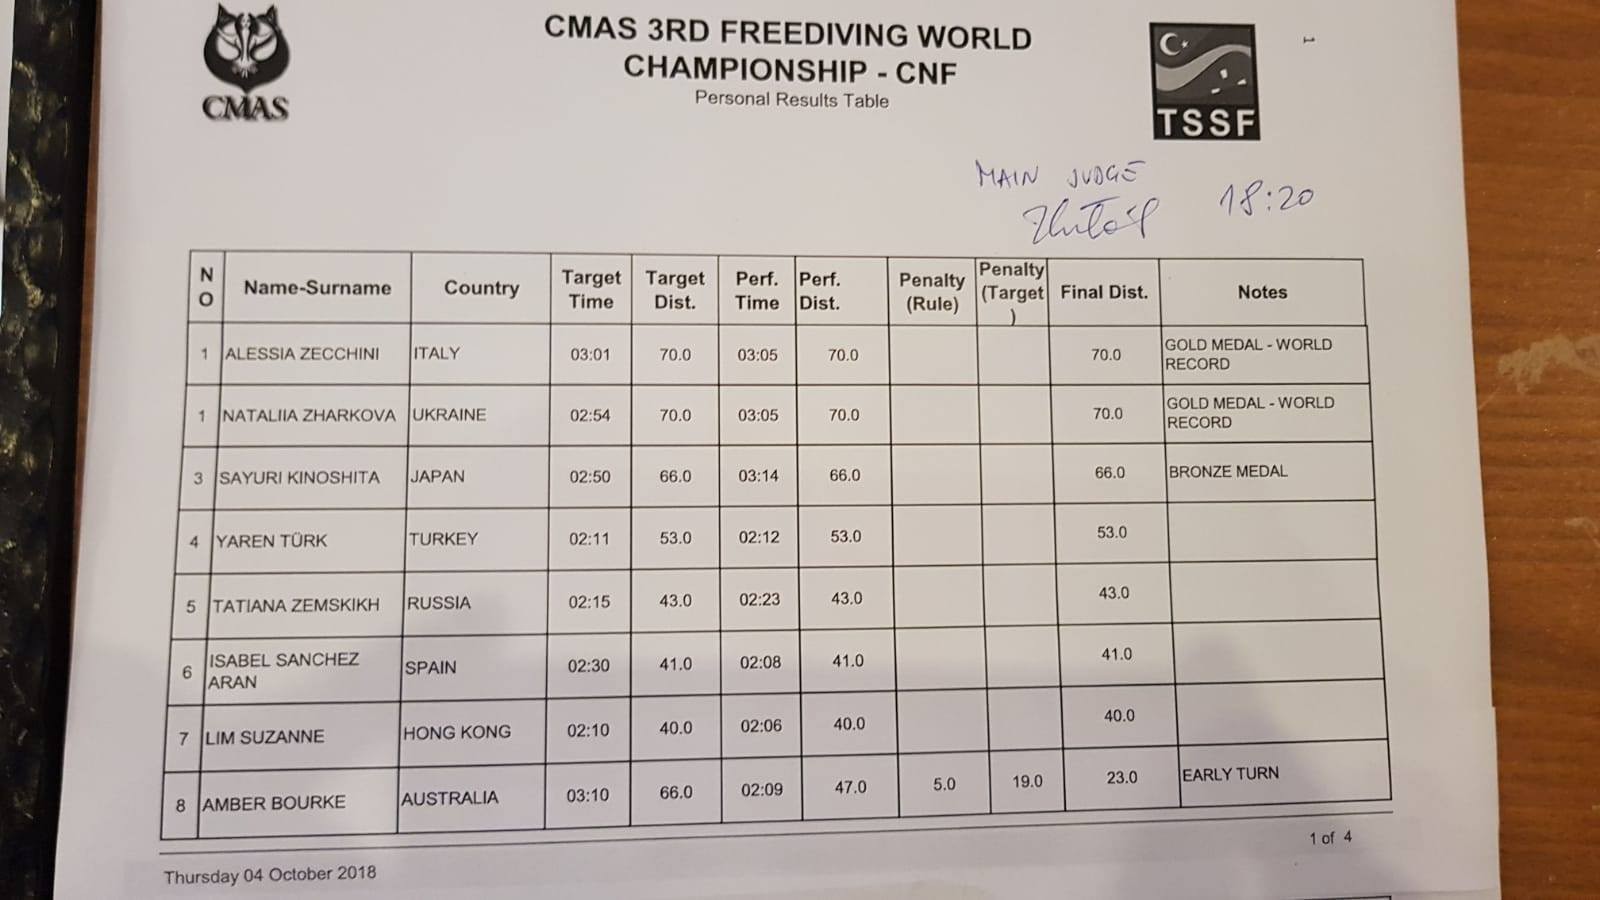 CMAS Freediving World Championships 2018 - Day 3 Results